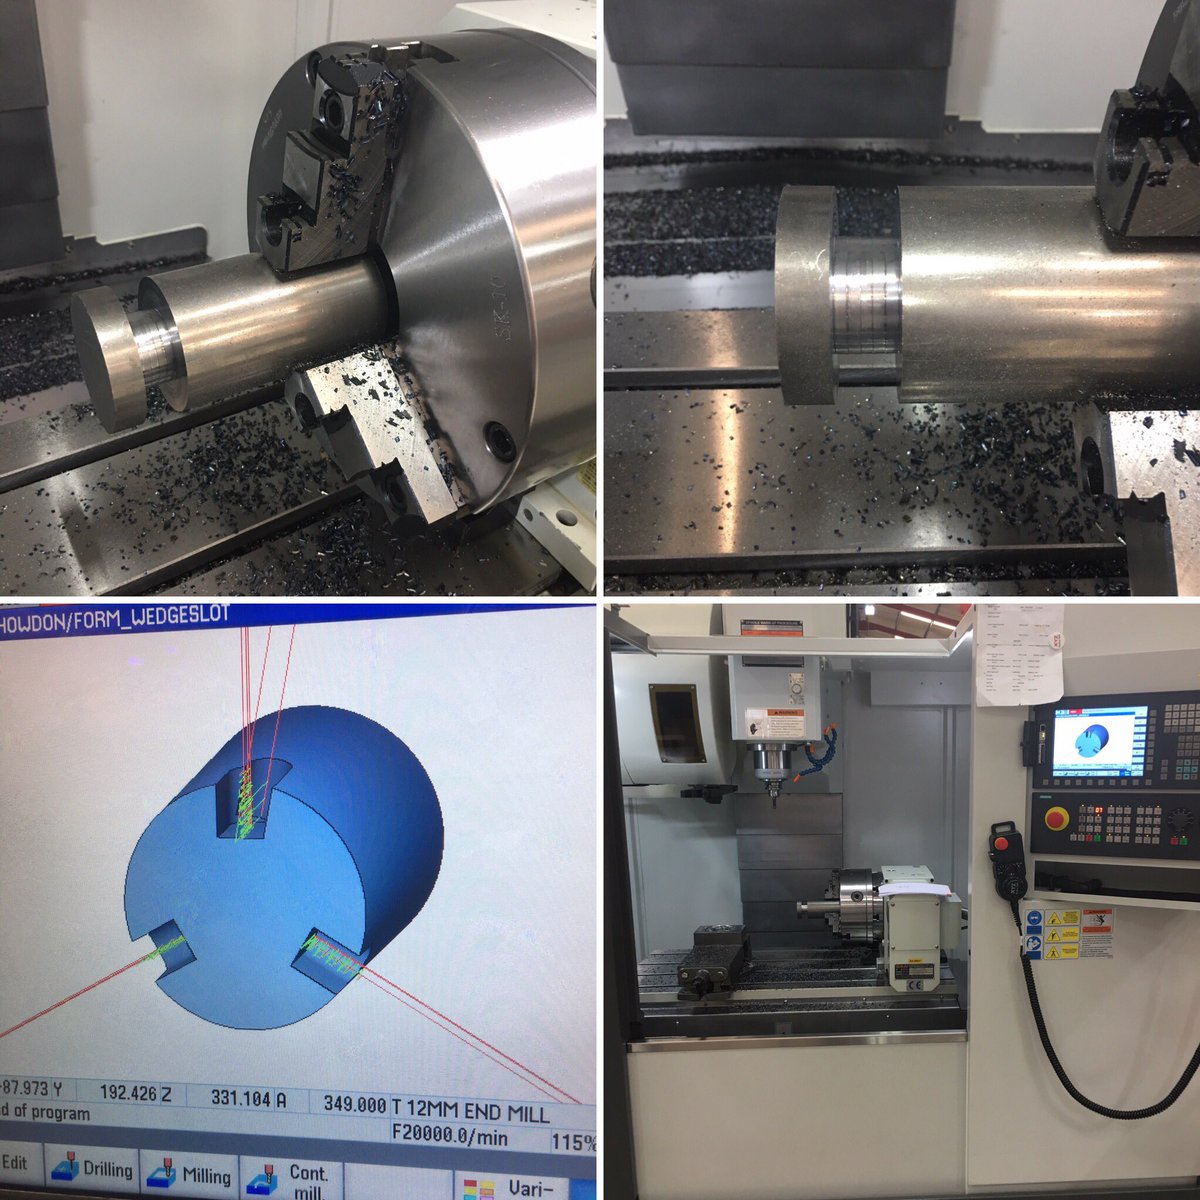 Today’s training @xyzmachinetools on the 1000 LR VMC using the Siemens 828D Shopmill software is focusing on the 4th axis...cutting slots (wedge shaped too) drilling & tapping. 

#GBmfg #ukmfg #MiBHour #vmc #trainingday